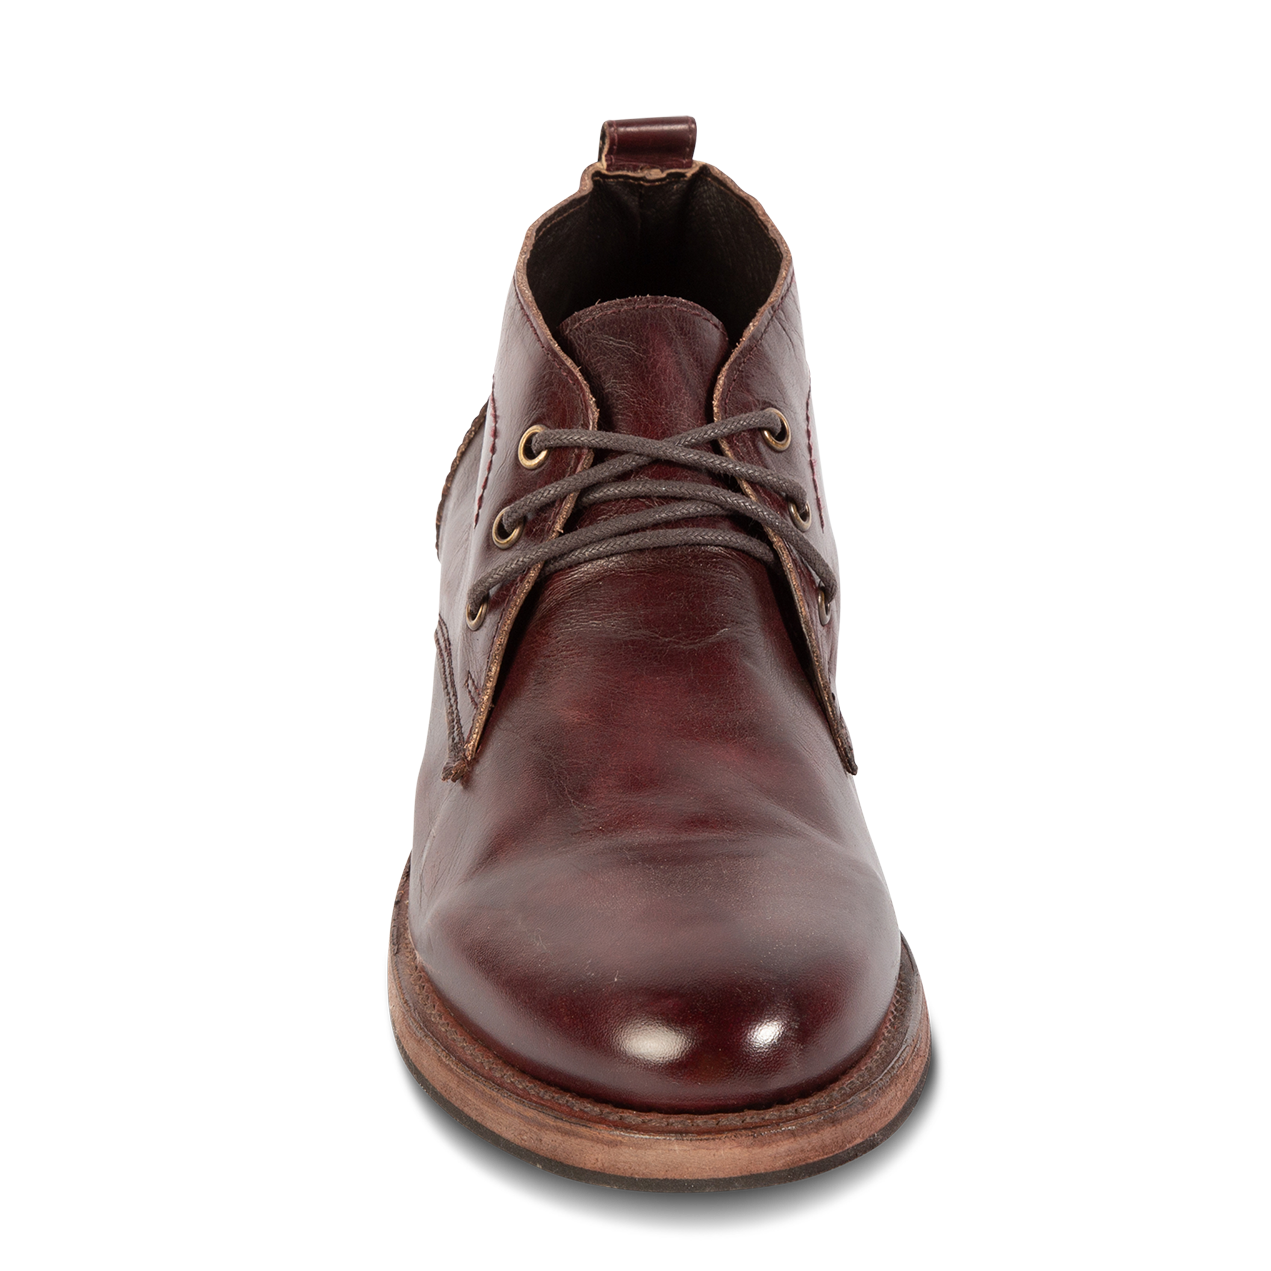 Front view showing adjustable lace closure on FREEBIRD men's McCoy wine shoe